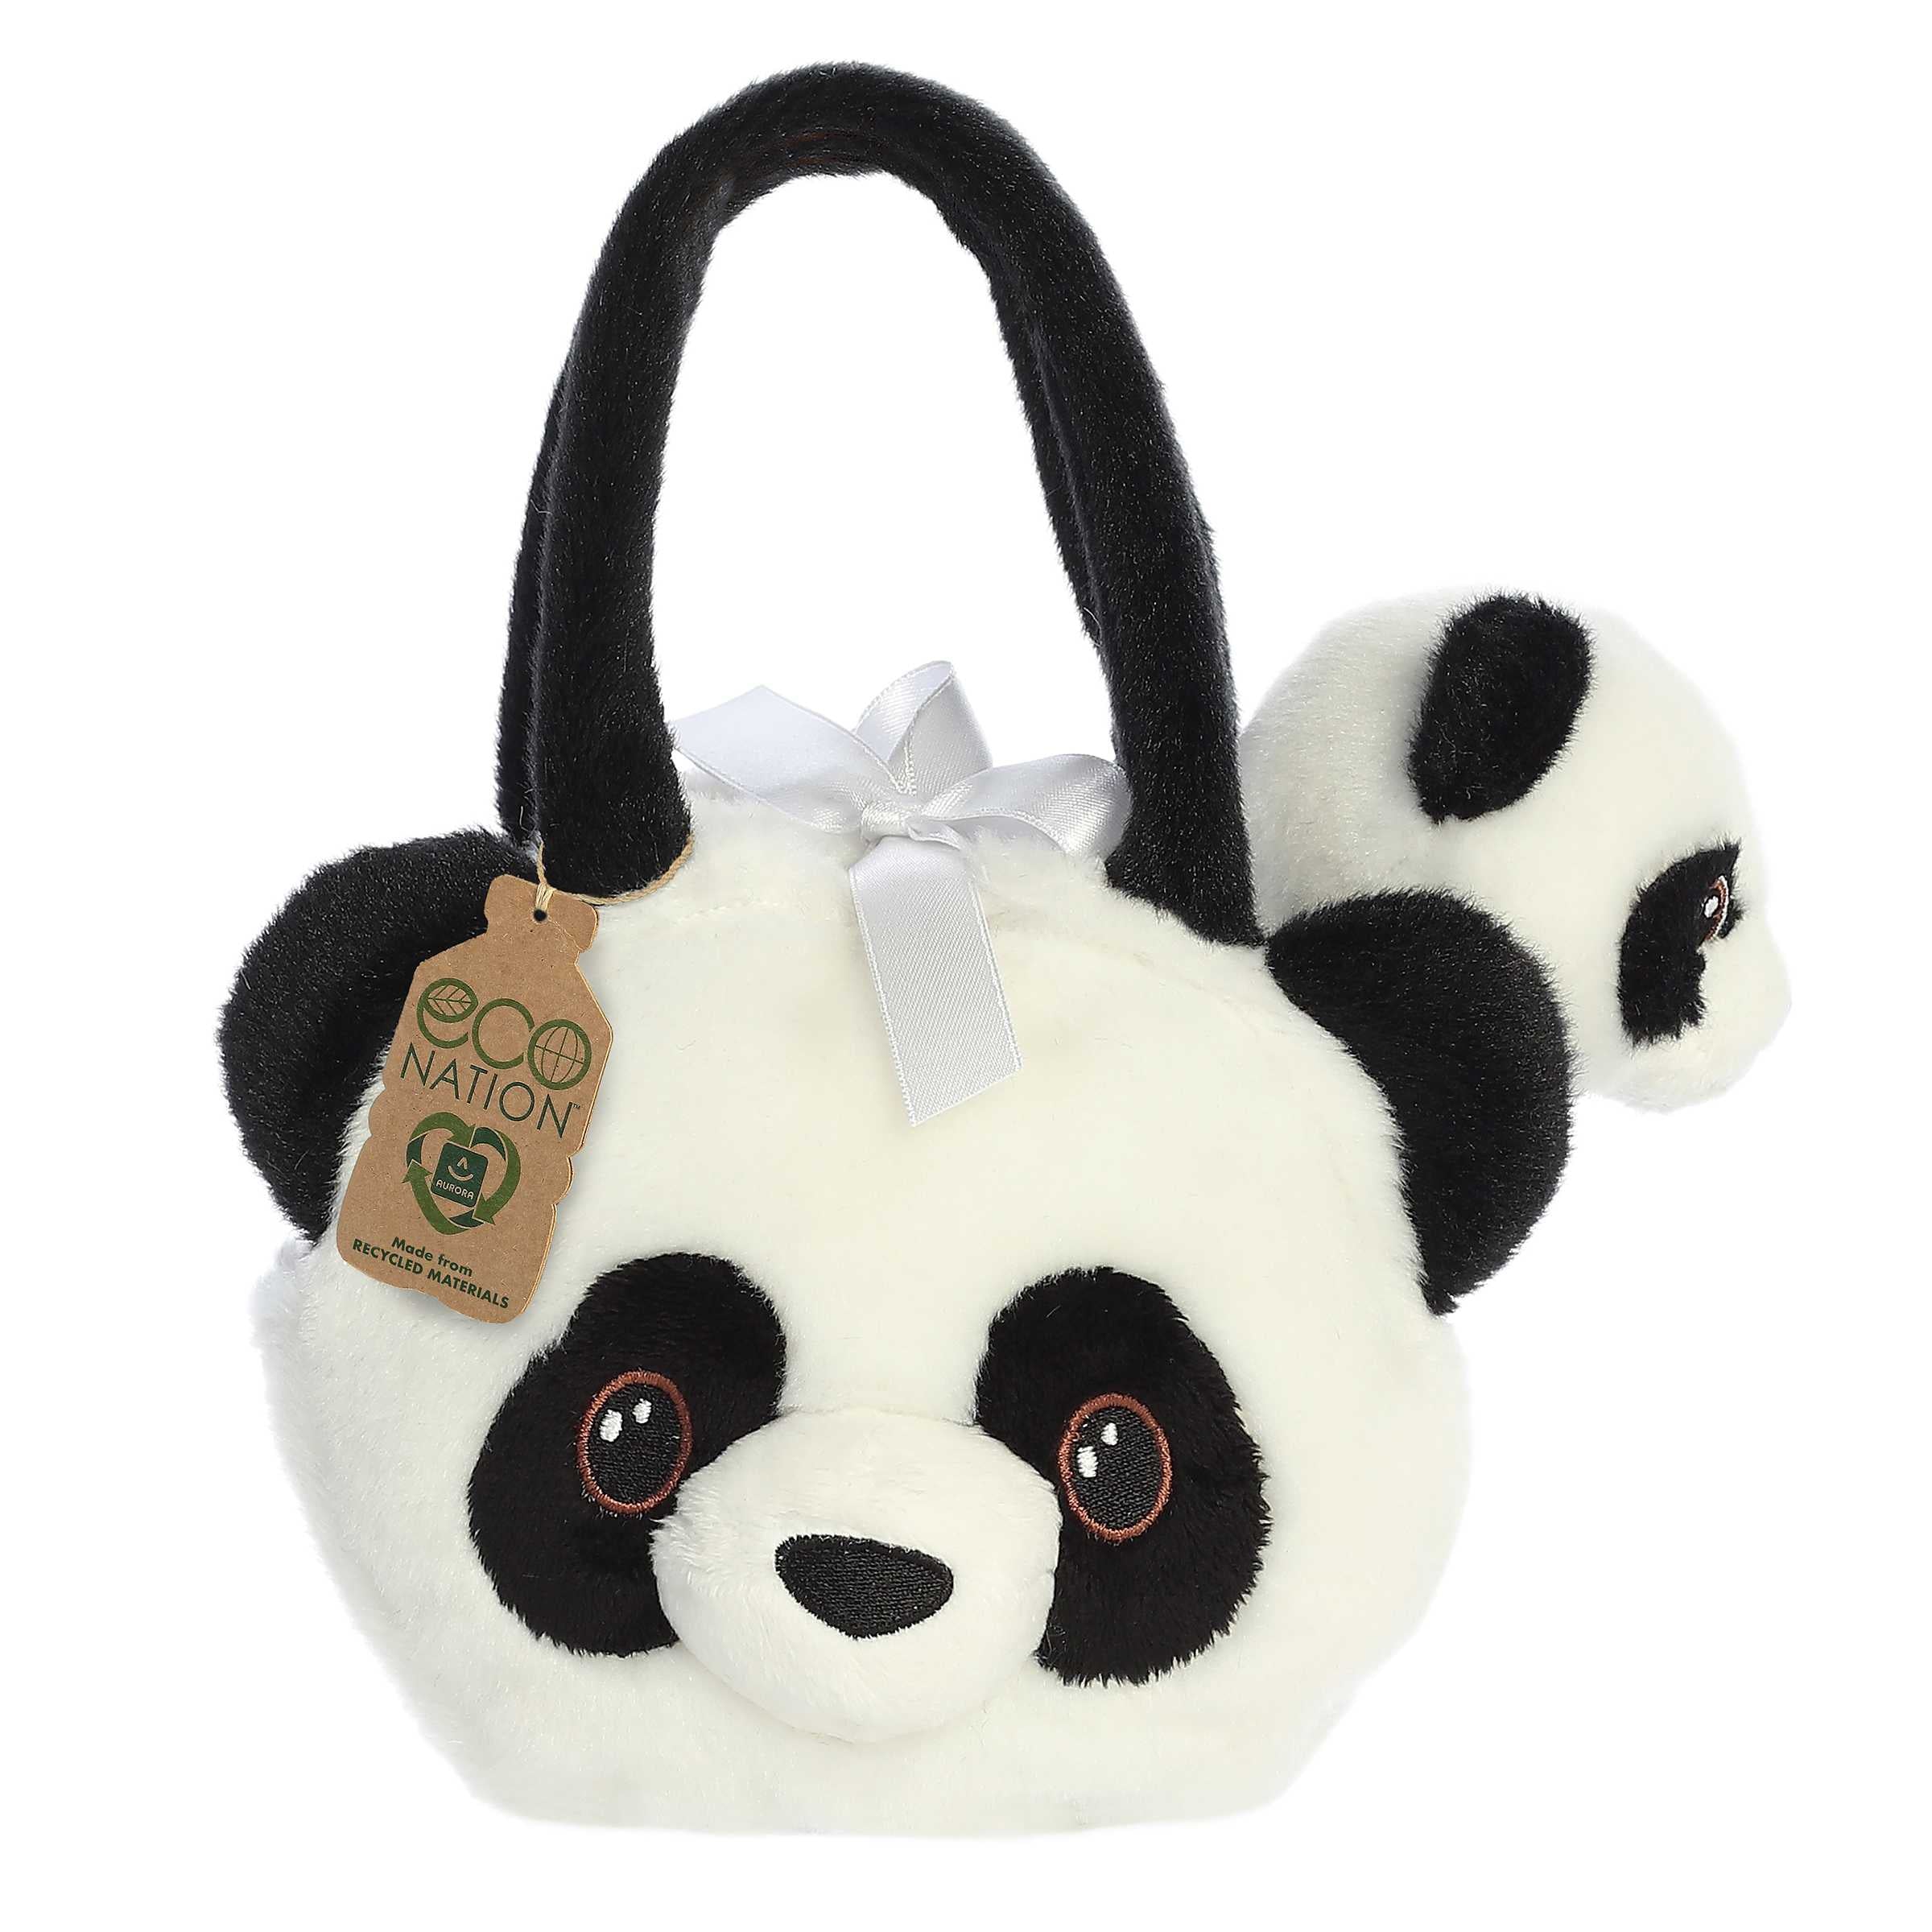 Eco Nation Baby Panda Plush by Aurora with plush panda head shaped carrier, crafted from recycled materials.